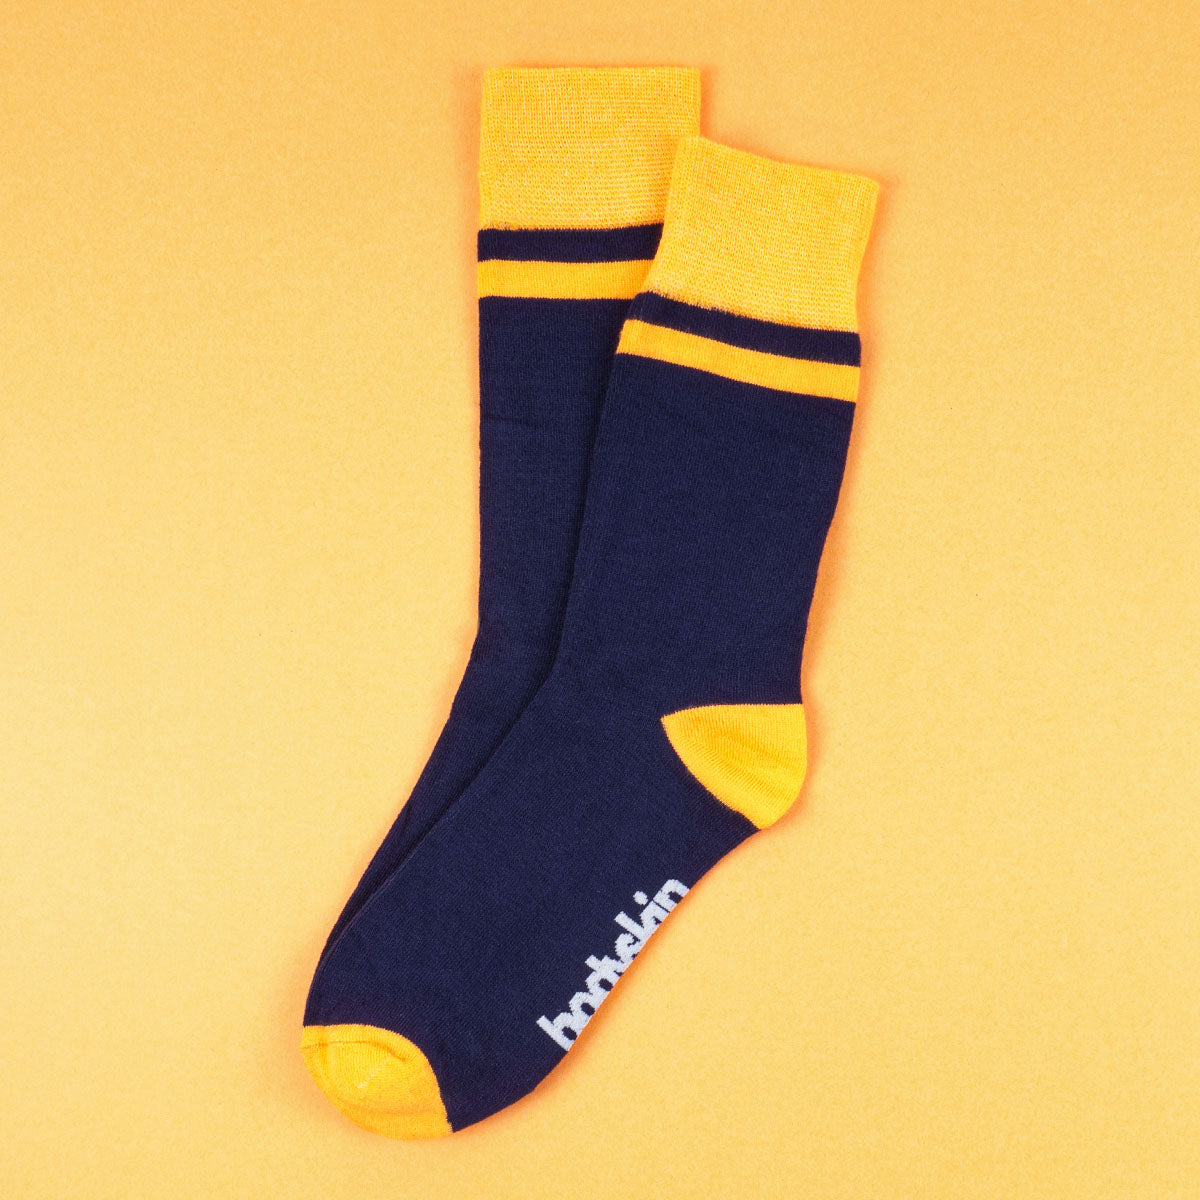 The "The Eccentric" Pack 12 pairs of socks selected Bodyskin